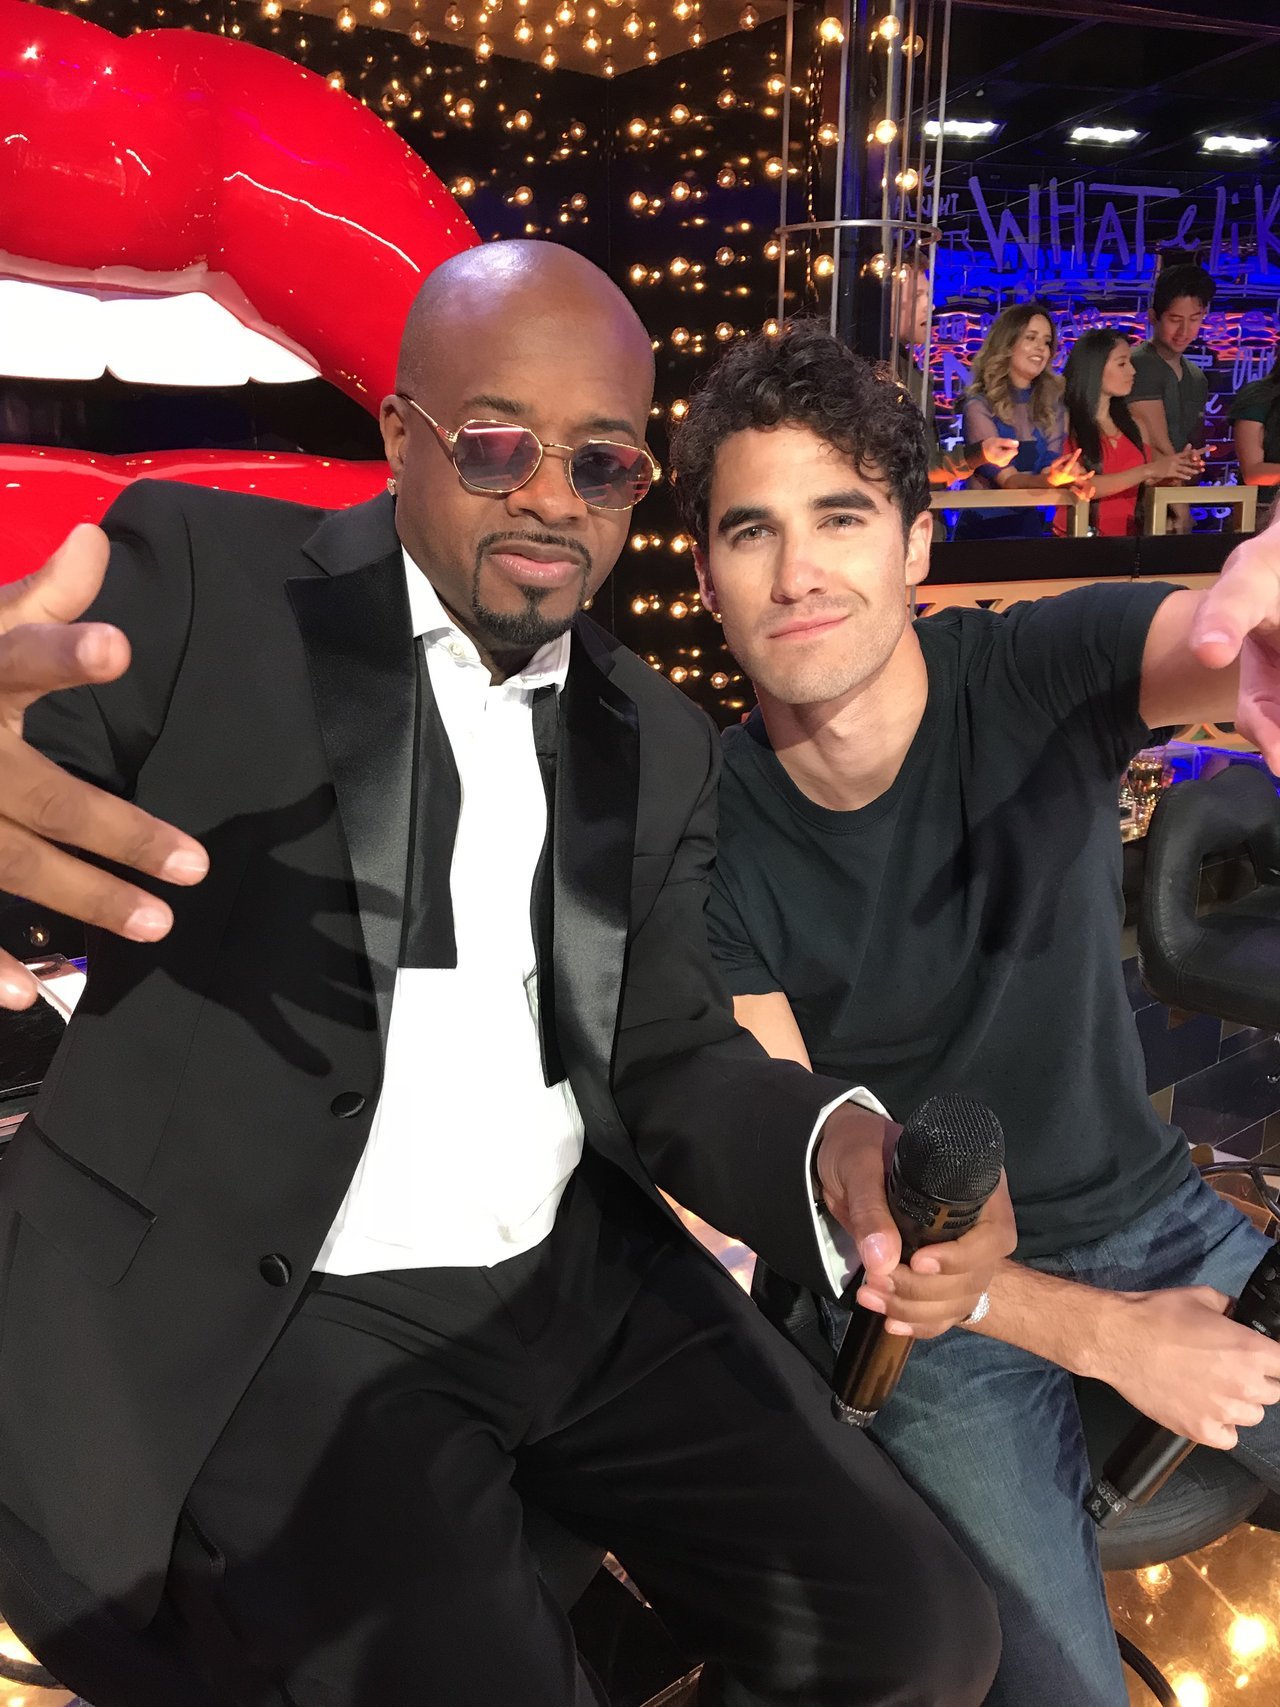 LIPSYNCBATTLE - Darren's Miscellaneous Projects and Events for 2019 Tumblr_plp9p5kfNT1v3daoq_1280